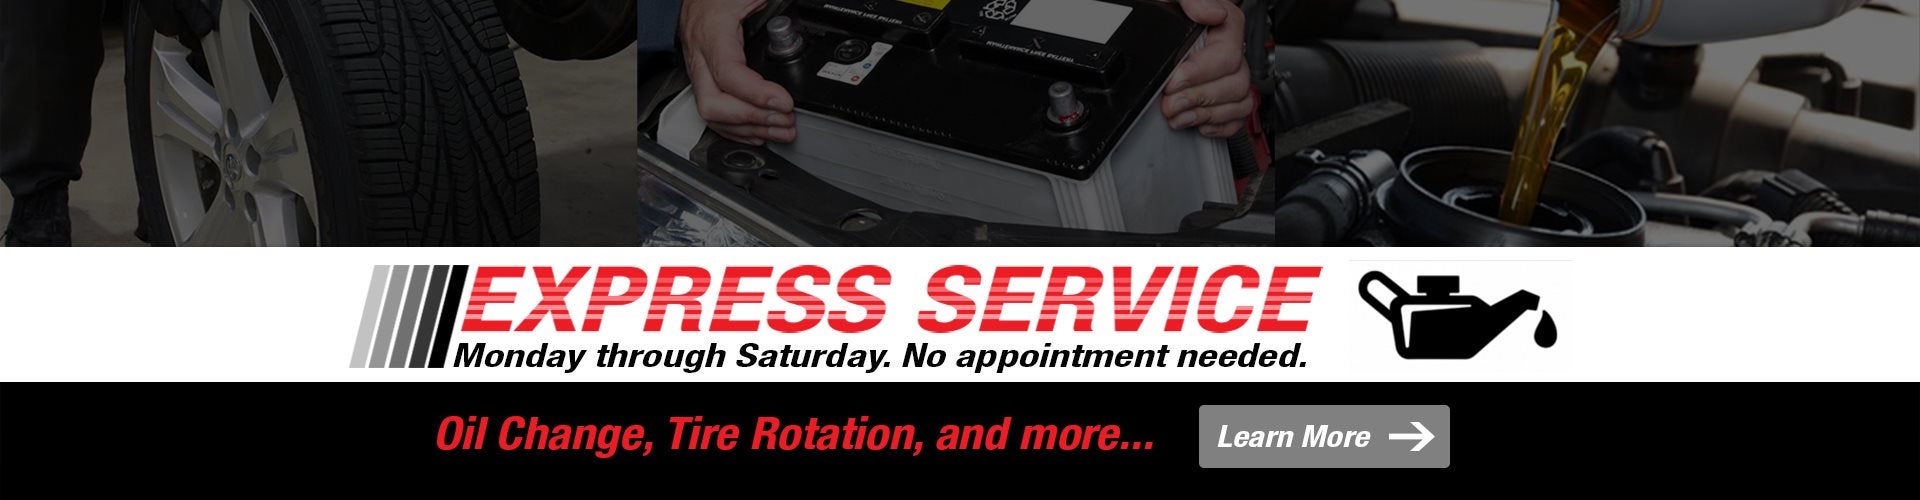 Express Oil Change, Tire Rotation, and more at Thelen Mazda!